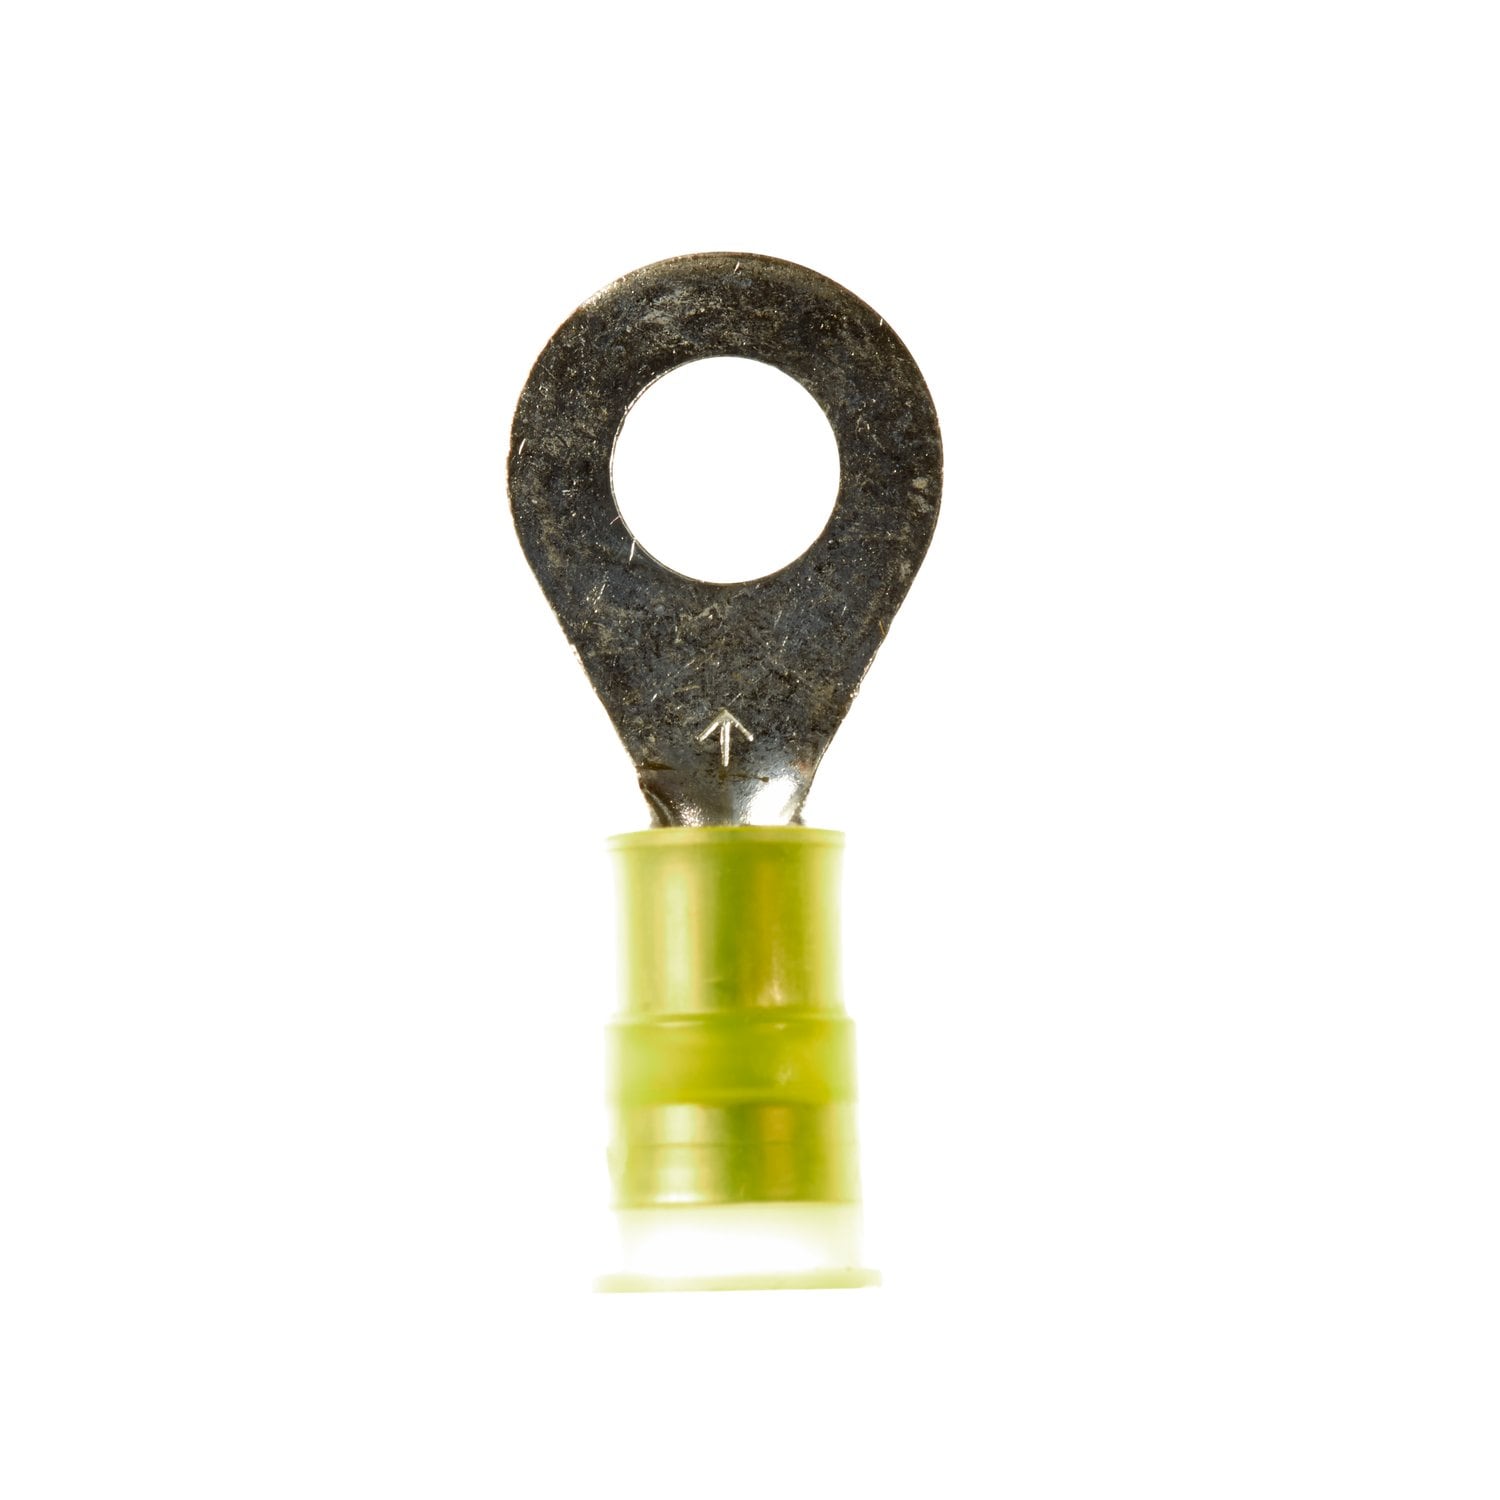 7000132263 - 3M Scotchlok Ring Tongue, Nylon Insulated w/Insulation Grip
MNG10-14R/SK, Stud Size 1/4, 500/Case